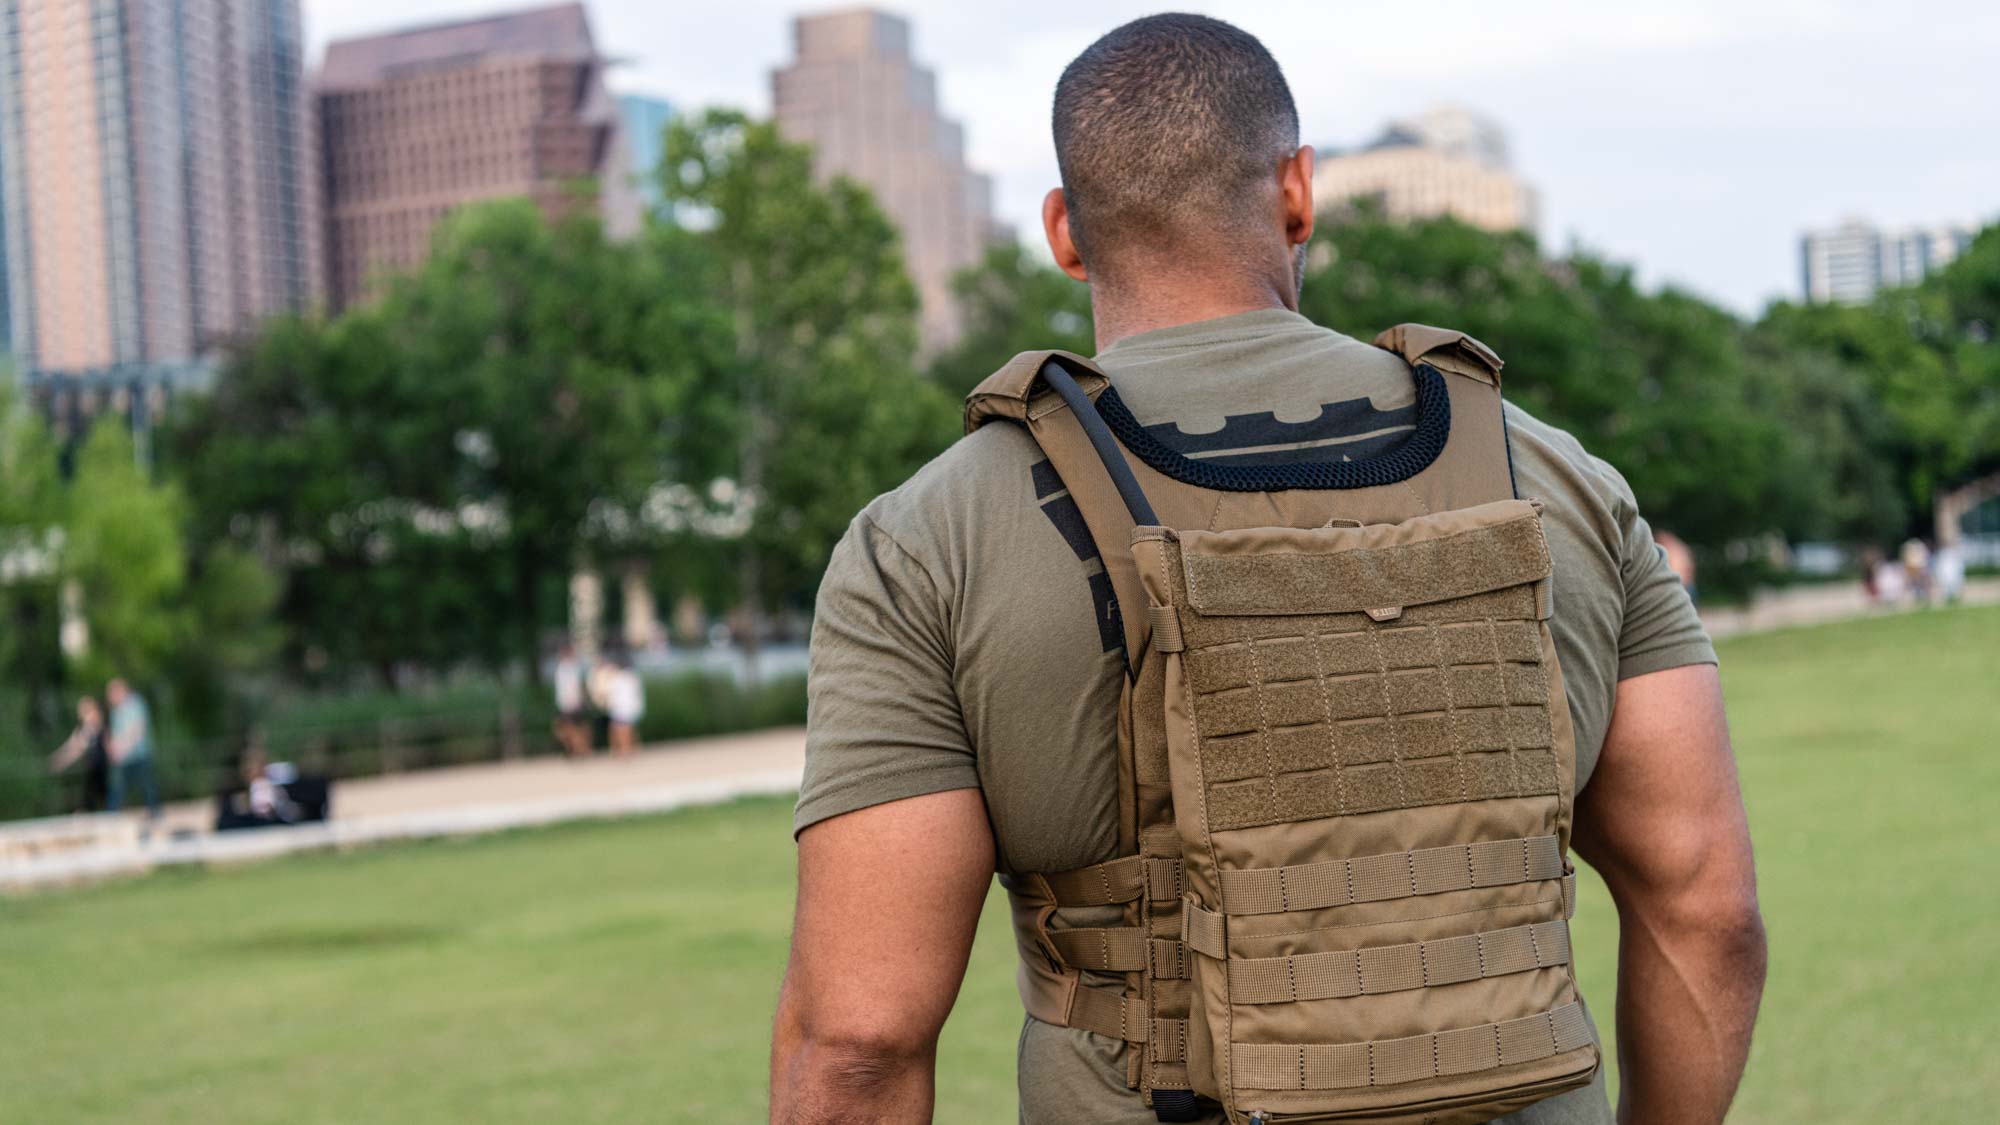 bidragyder Troubled En smule 5.11 Tactical TacTec Trainer weight vest review | Tom's Guide